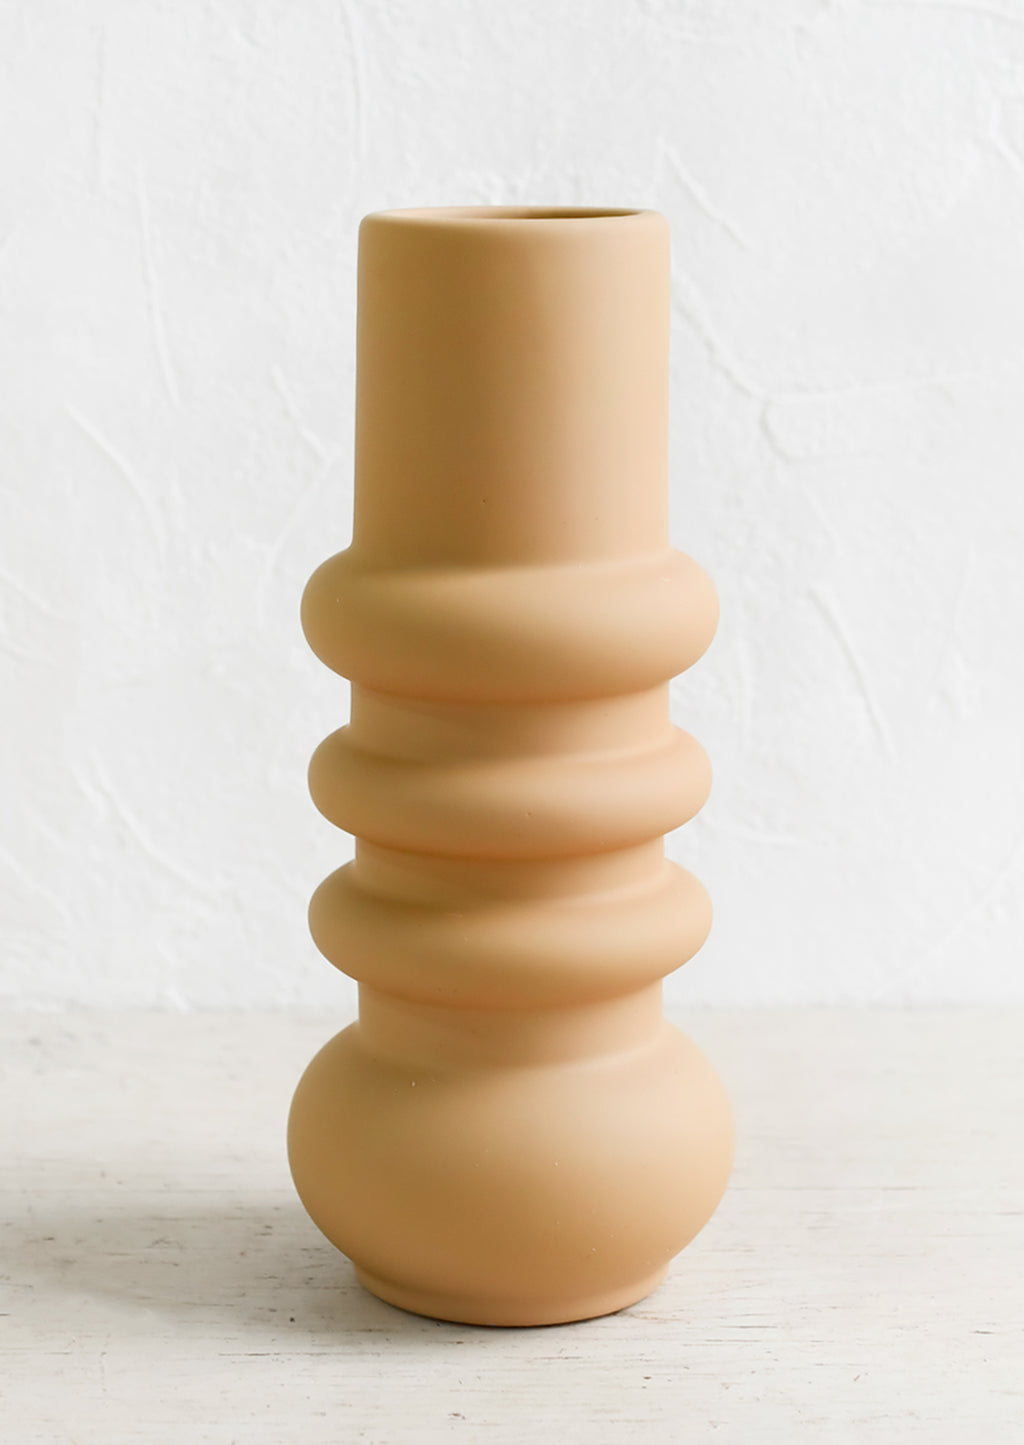 Medium / Tan: A tall matte finish vase in tan with grooved, curvy shape.